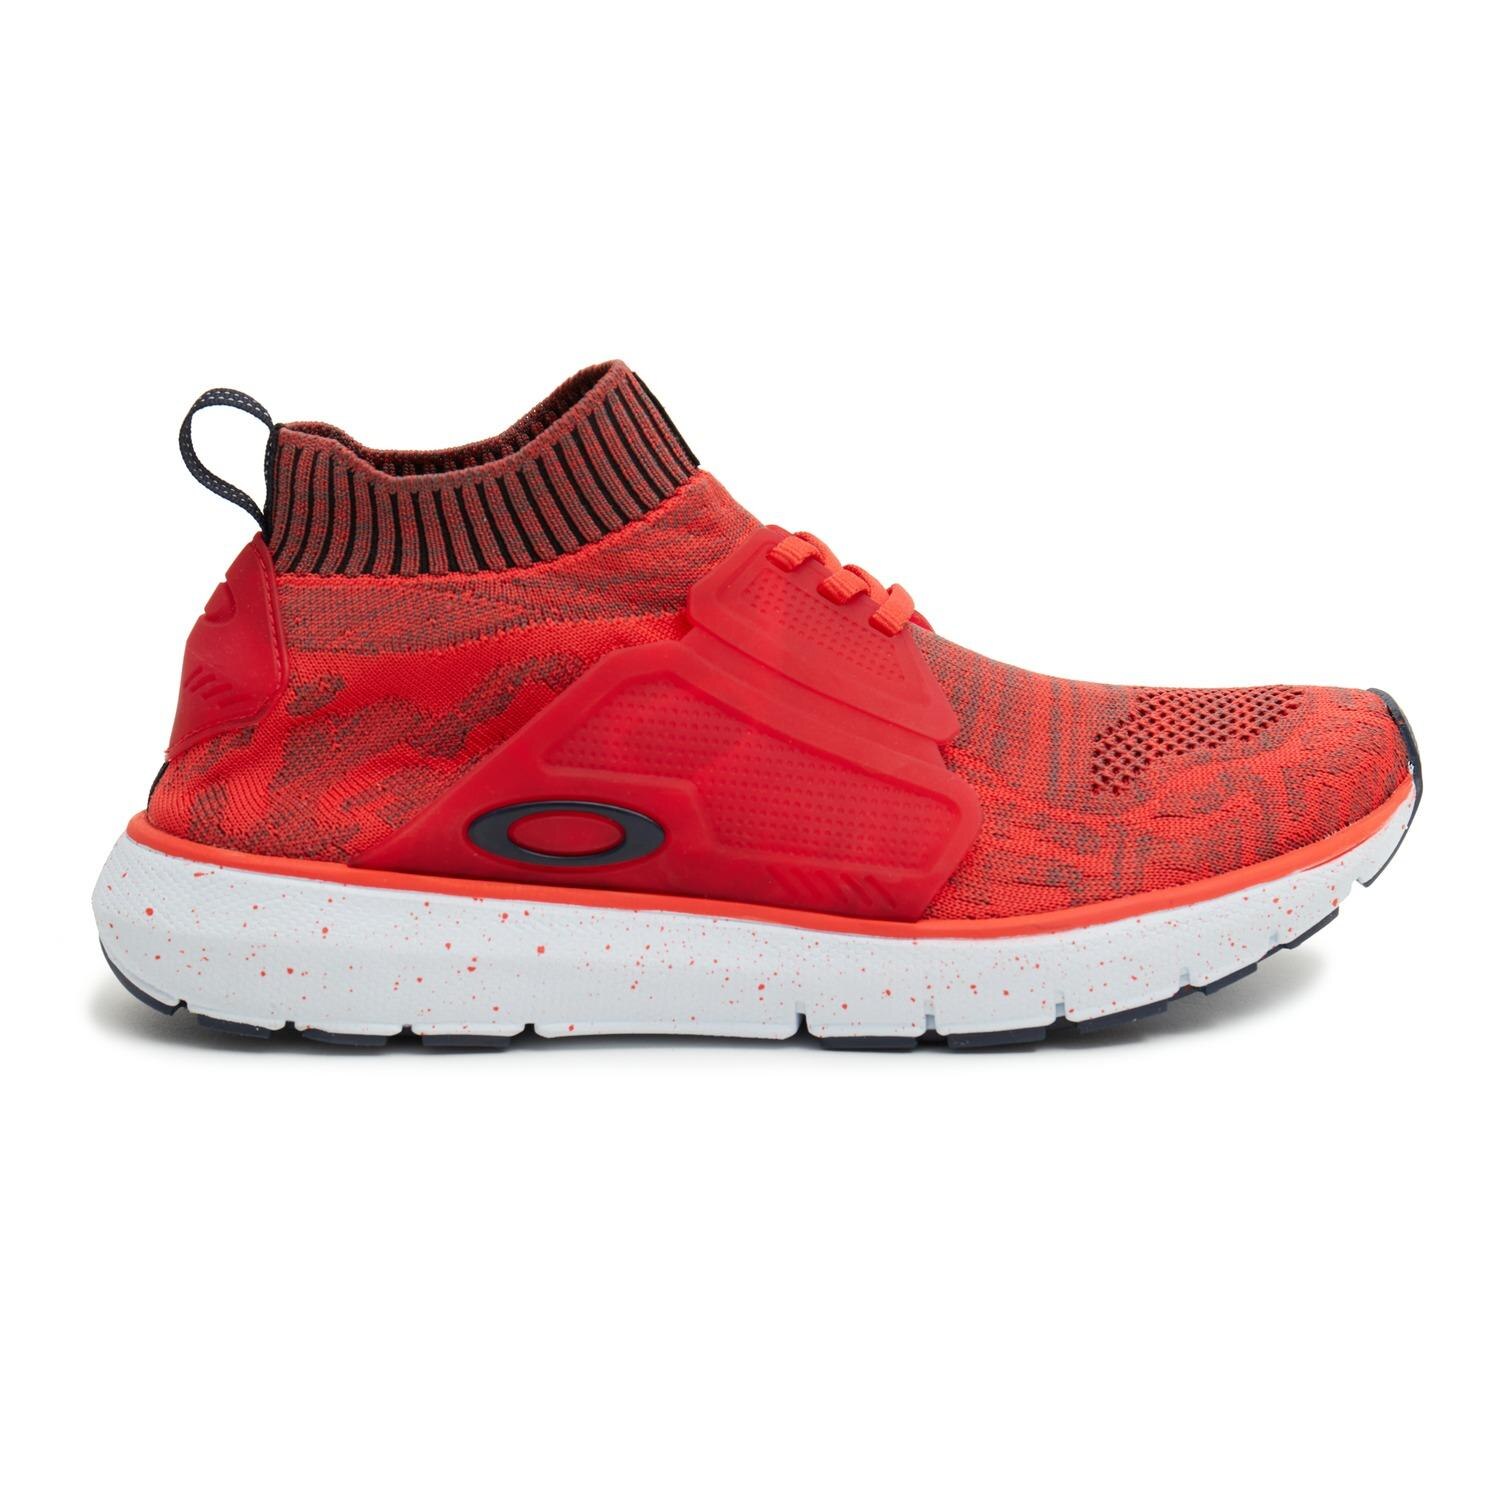 red running sneakers